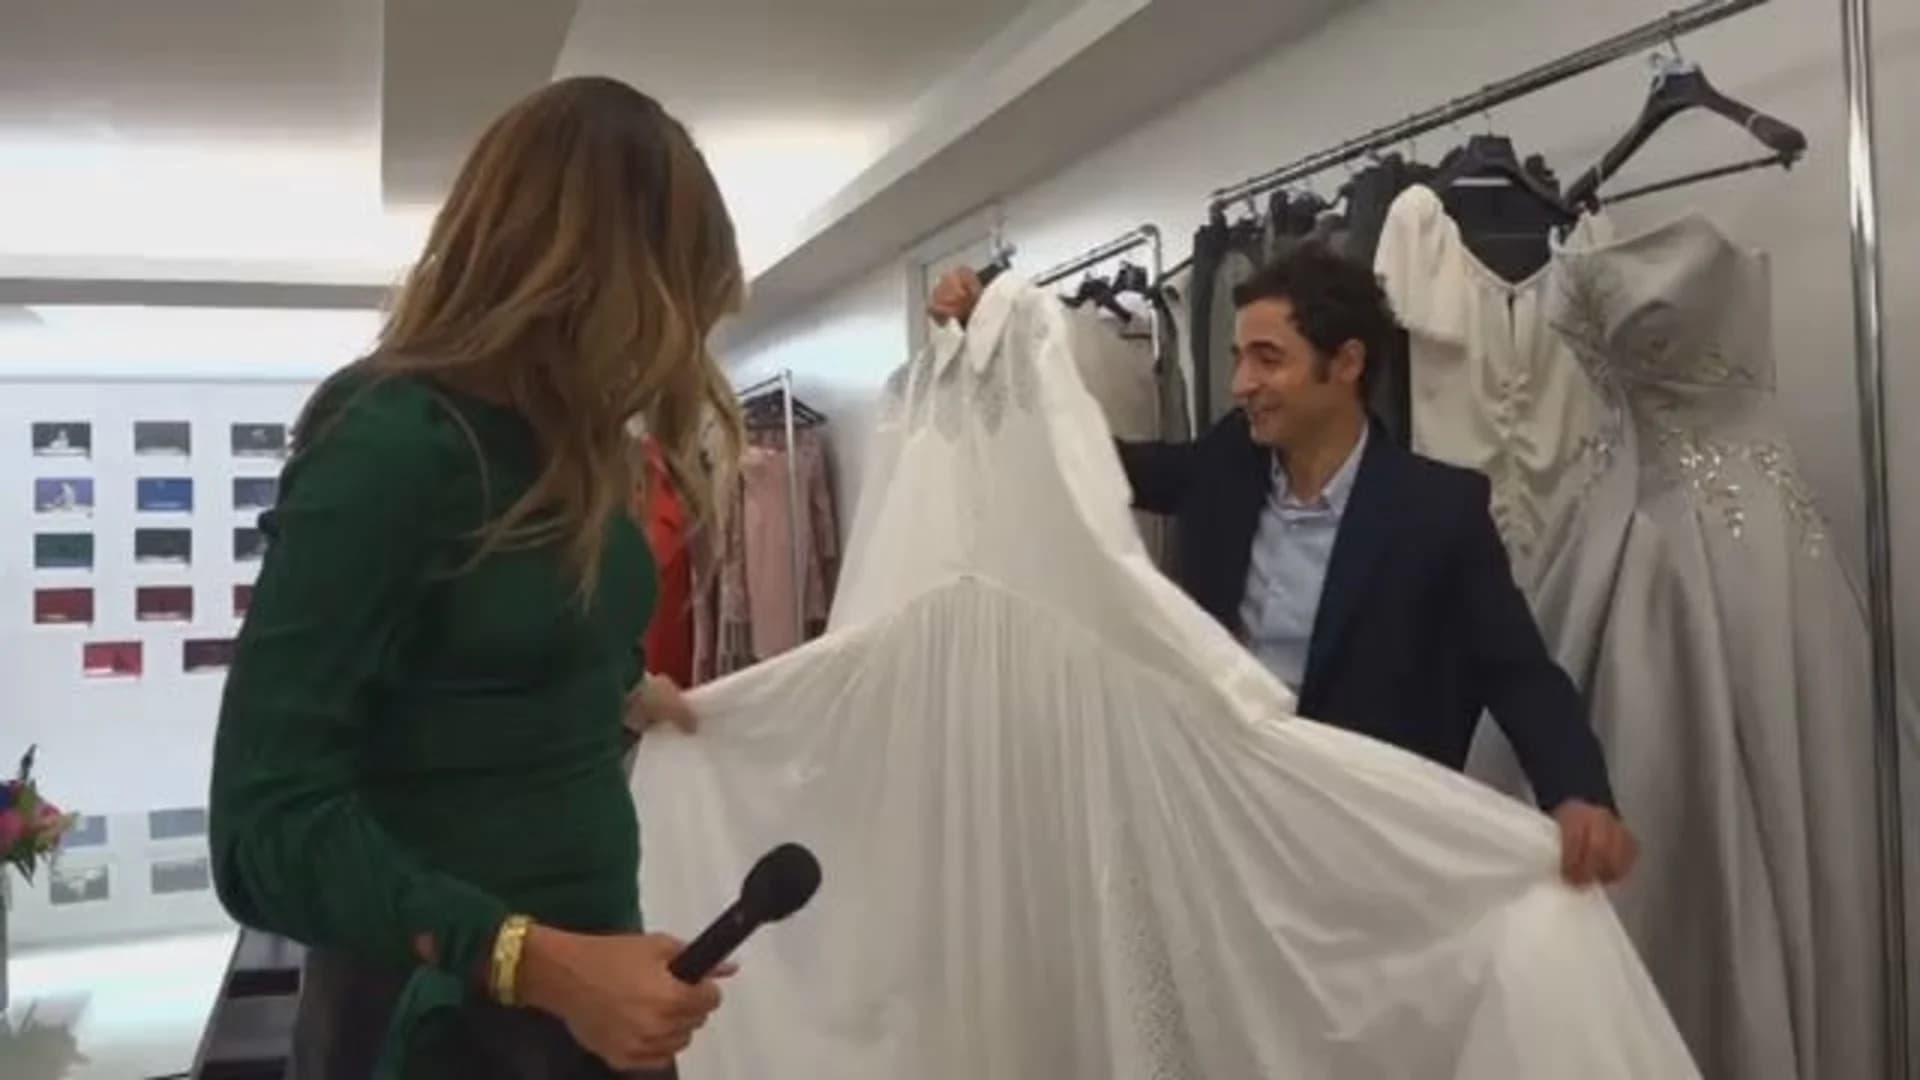 News 12+ goes behind the scenes at Fashion Week